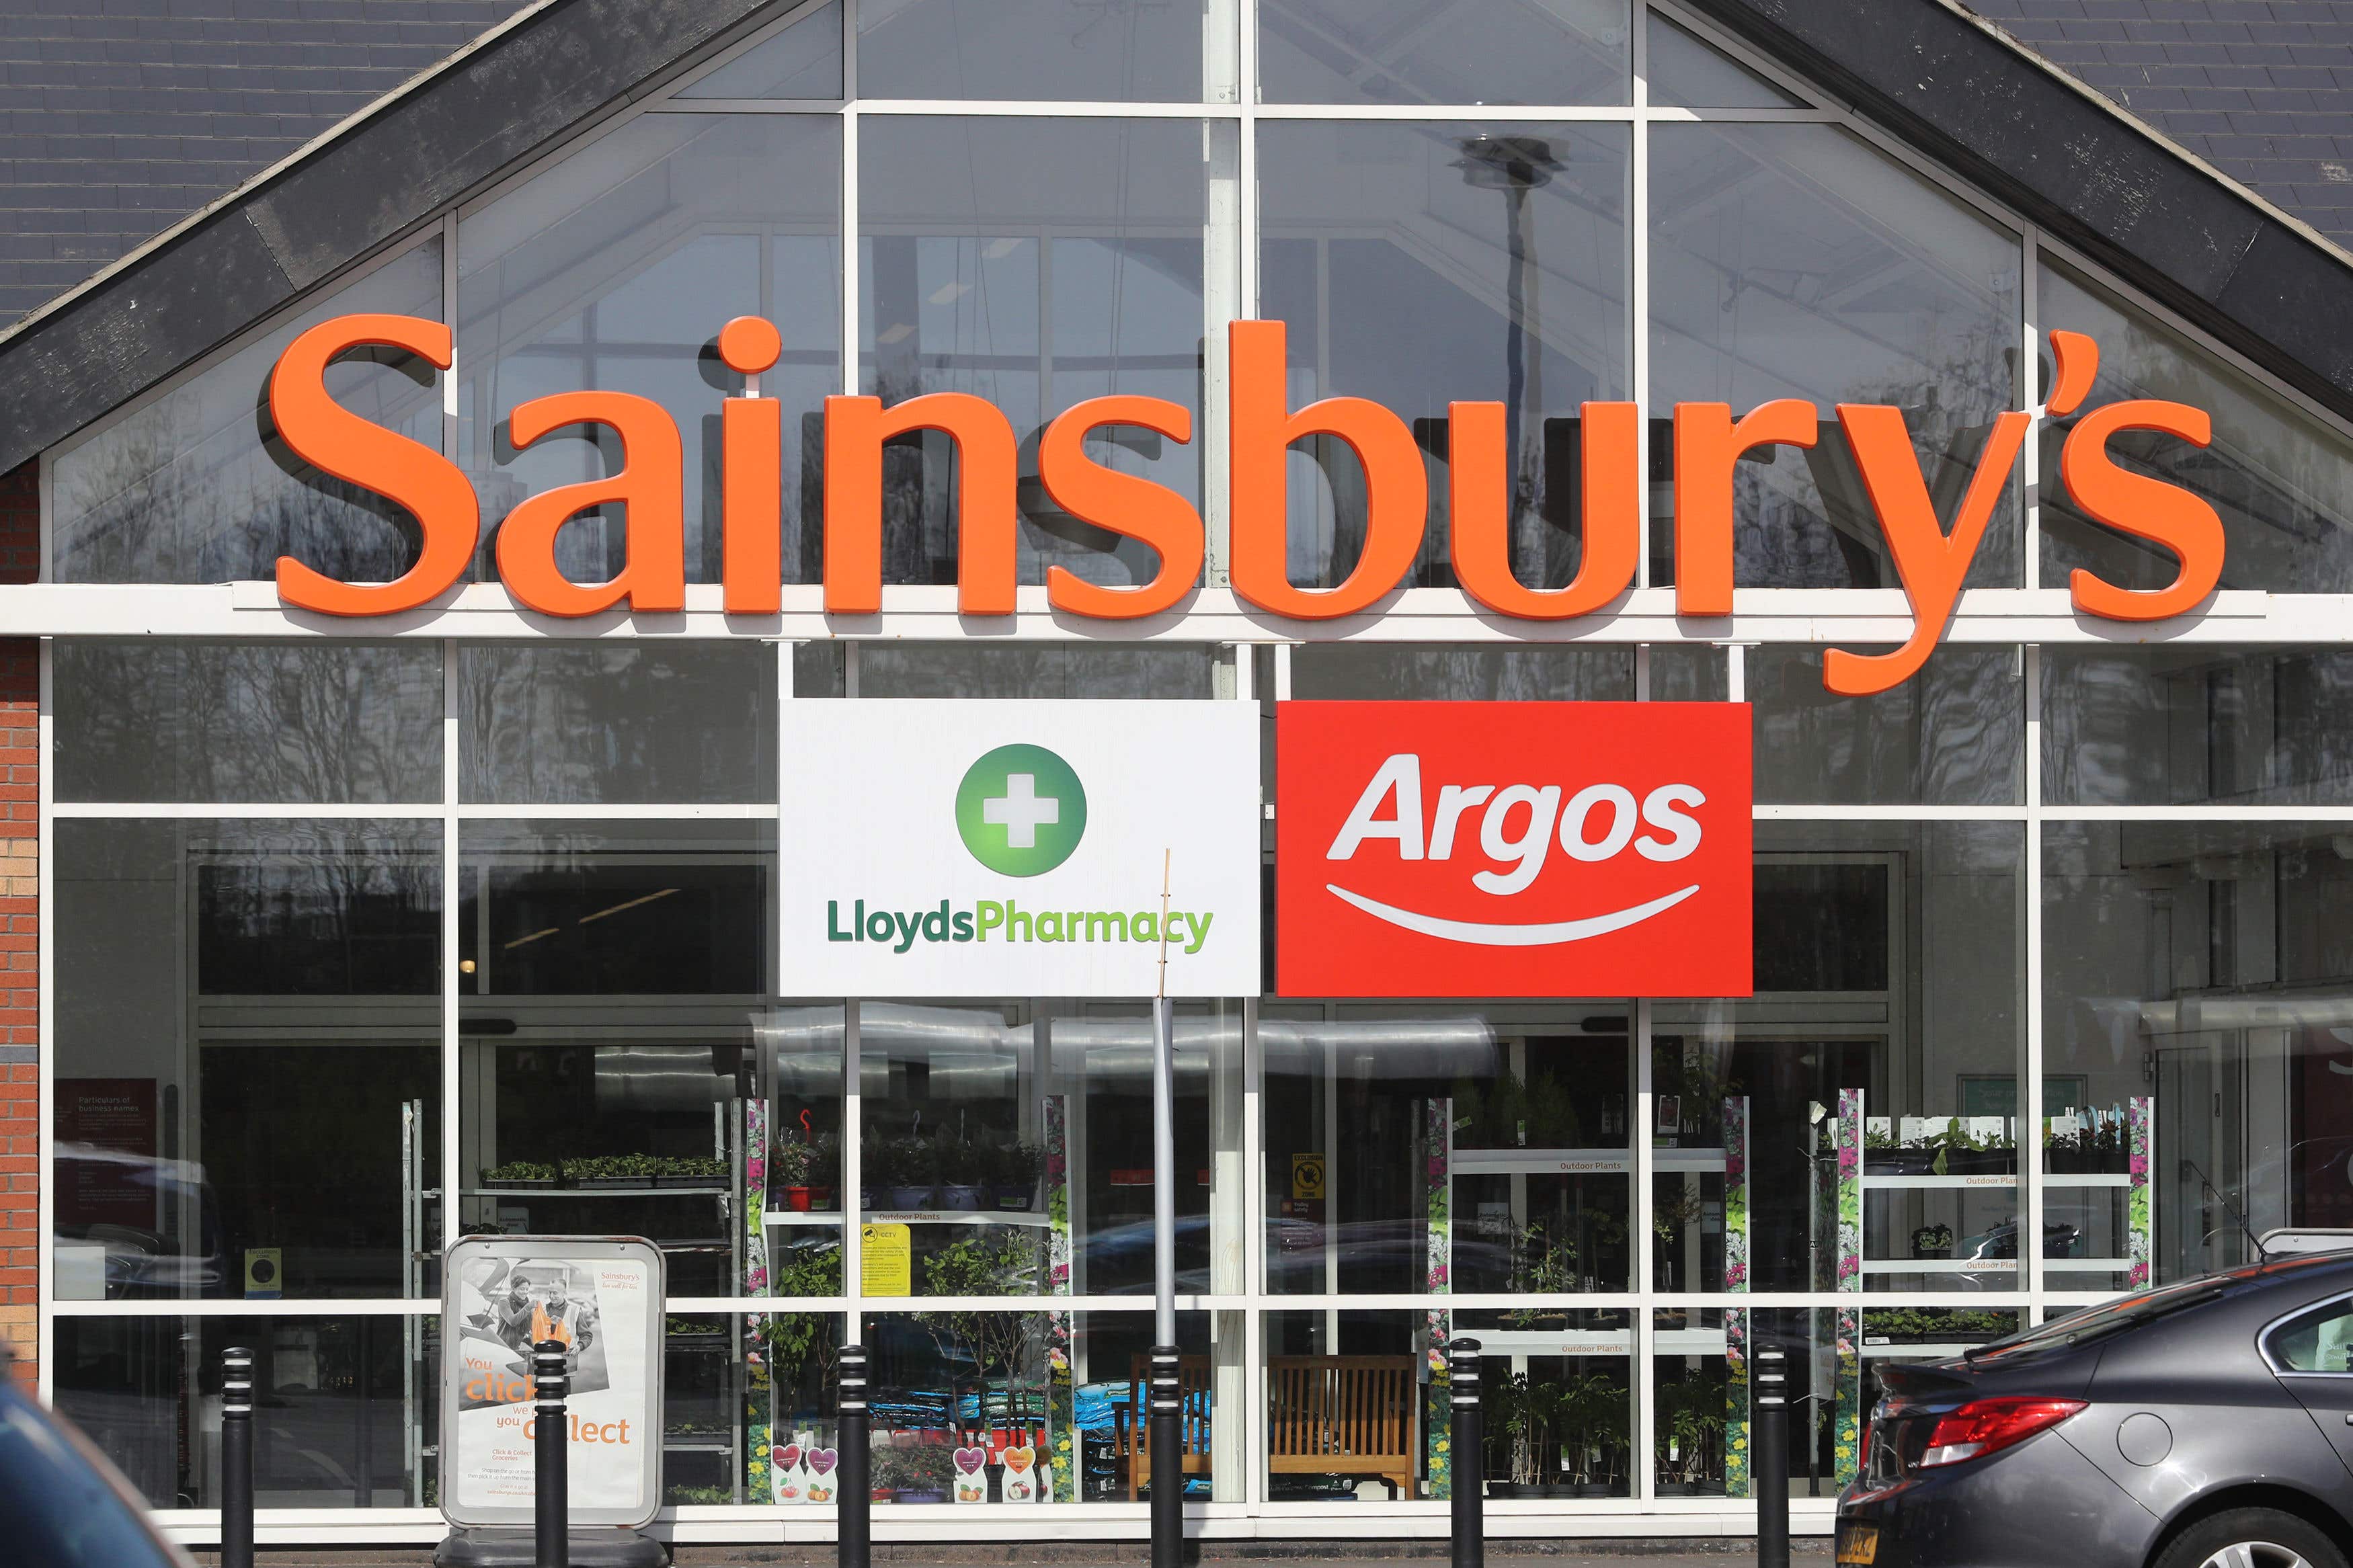 Sainsbury’s said it is ‘determined to battle inflation’ for its customers following a hit to profits